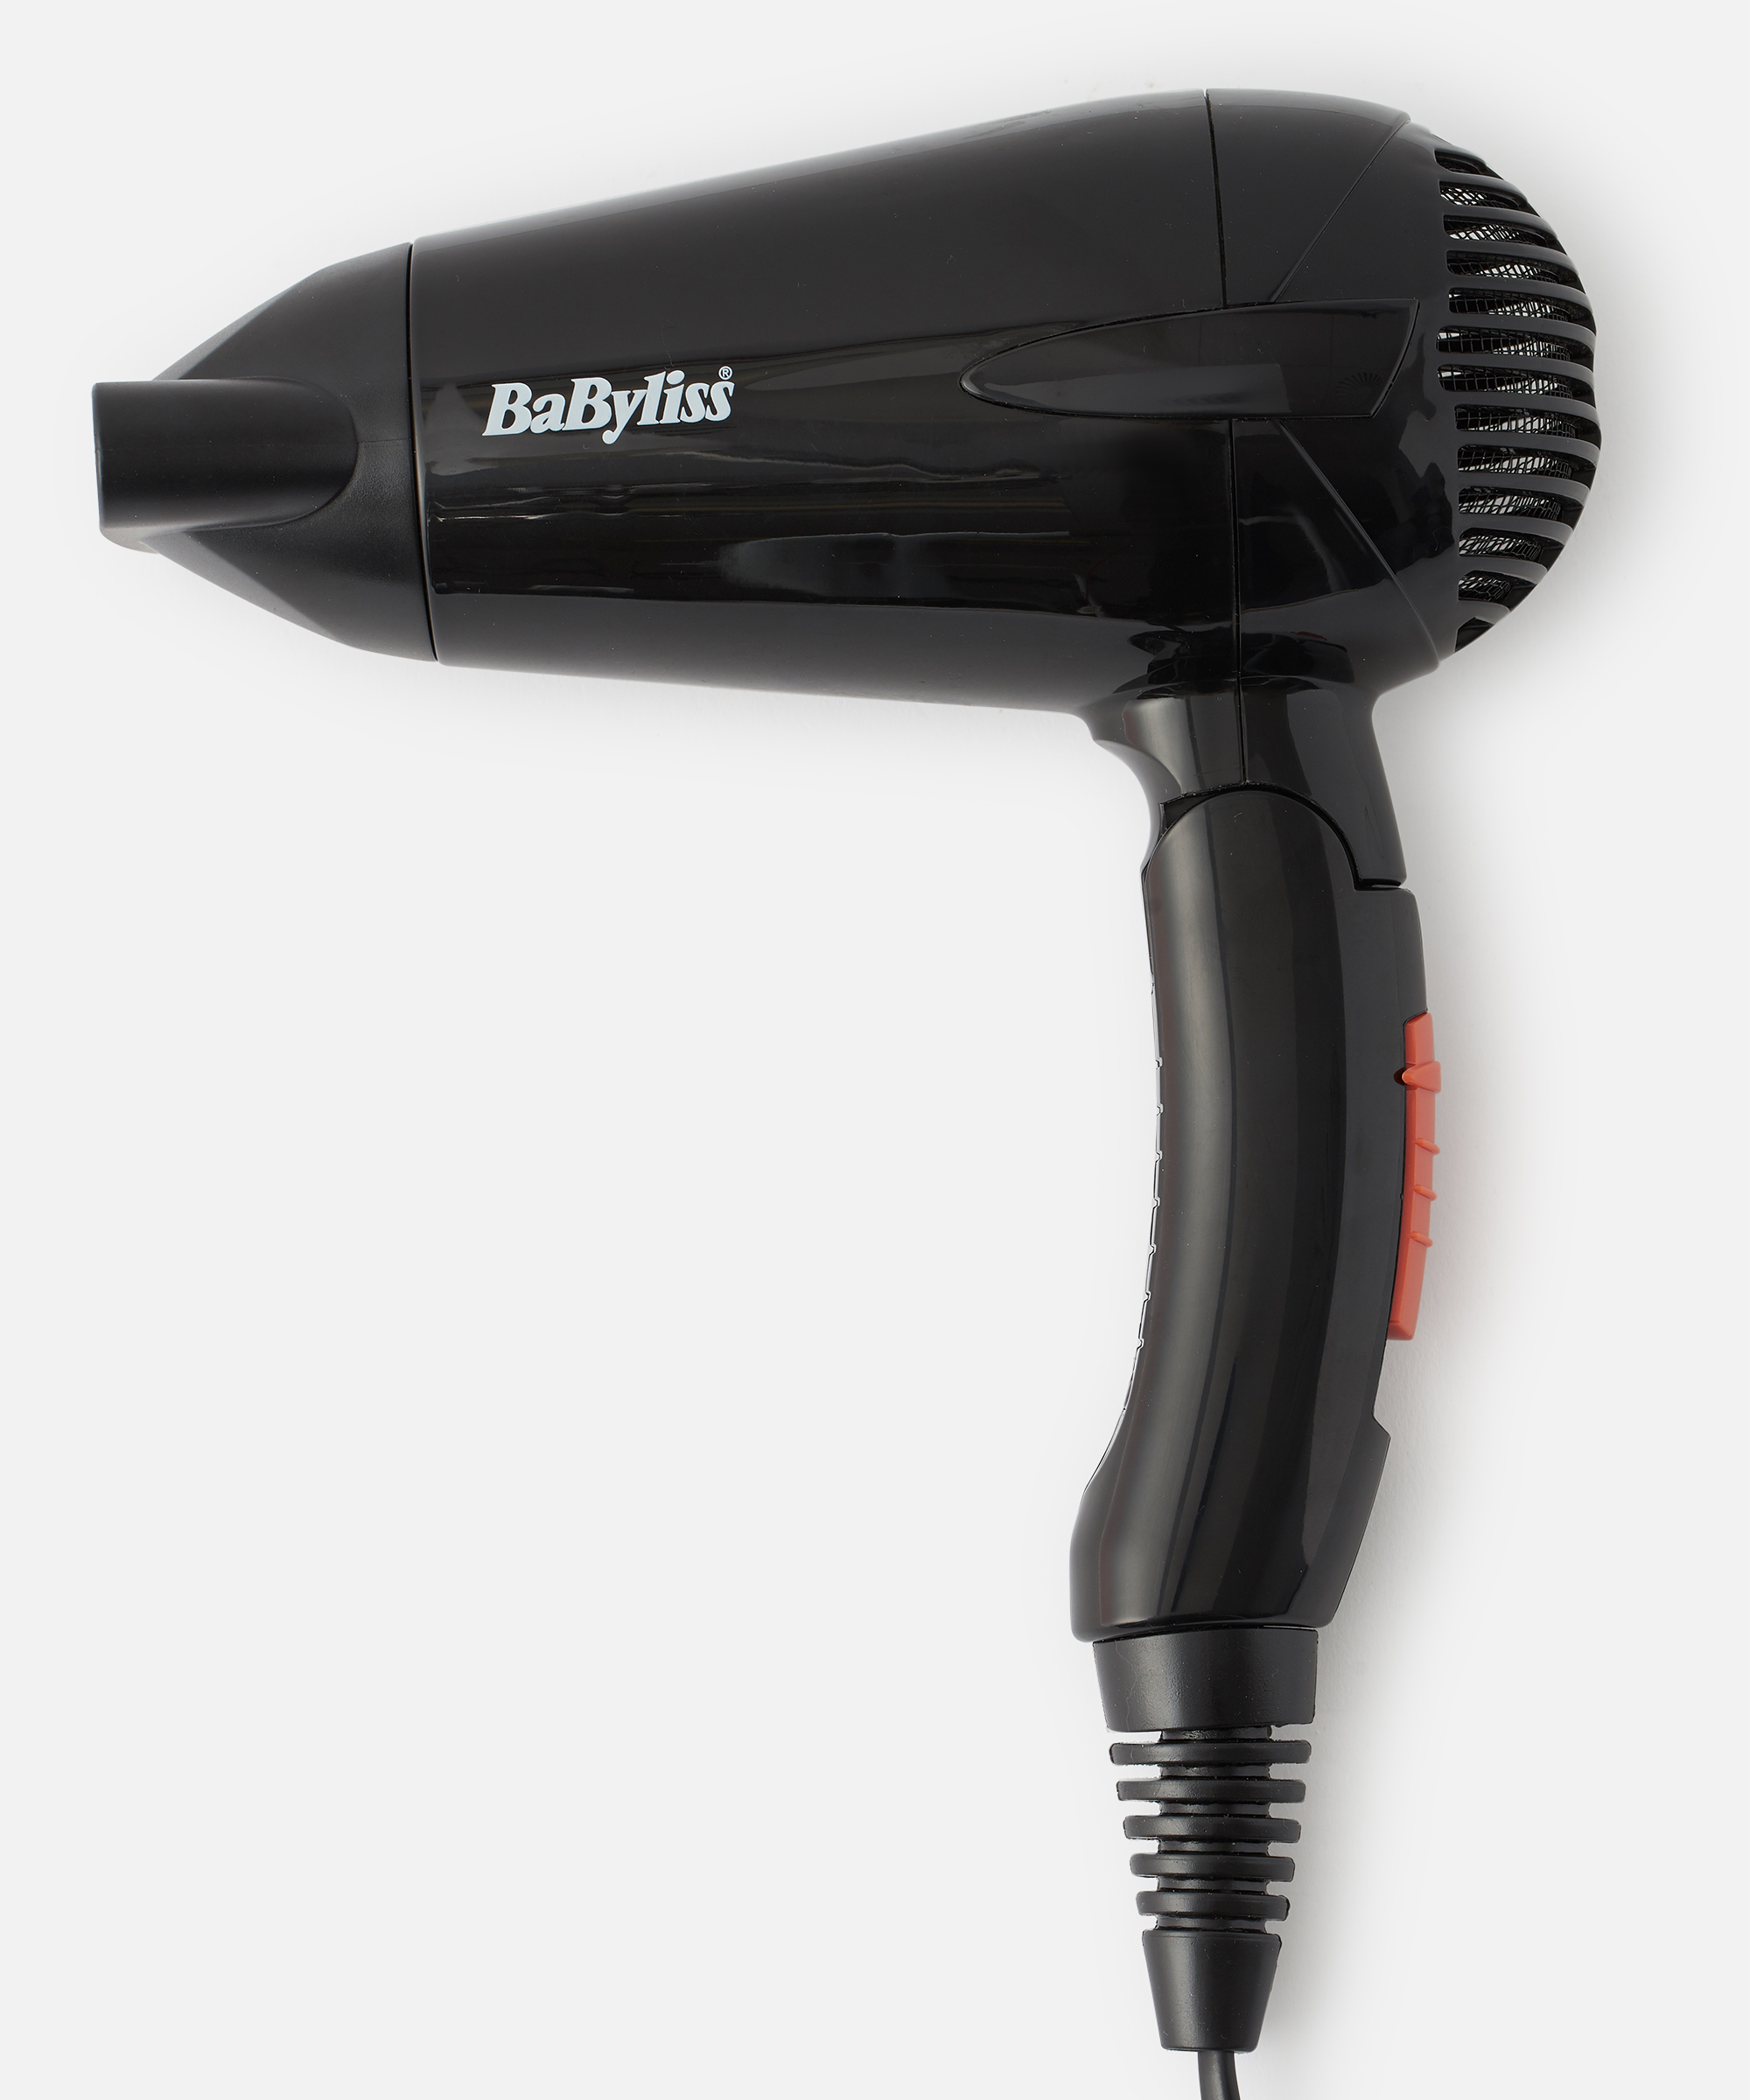 BaByliss Travel Dryer 2000 at BEAUTY BAY